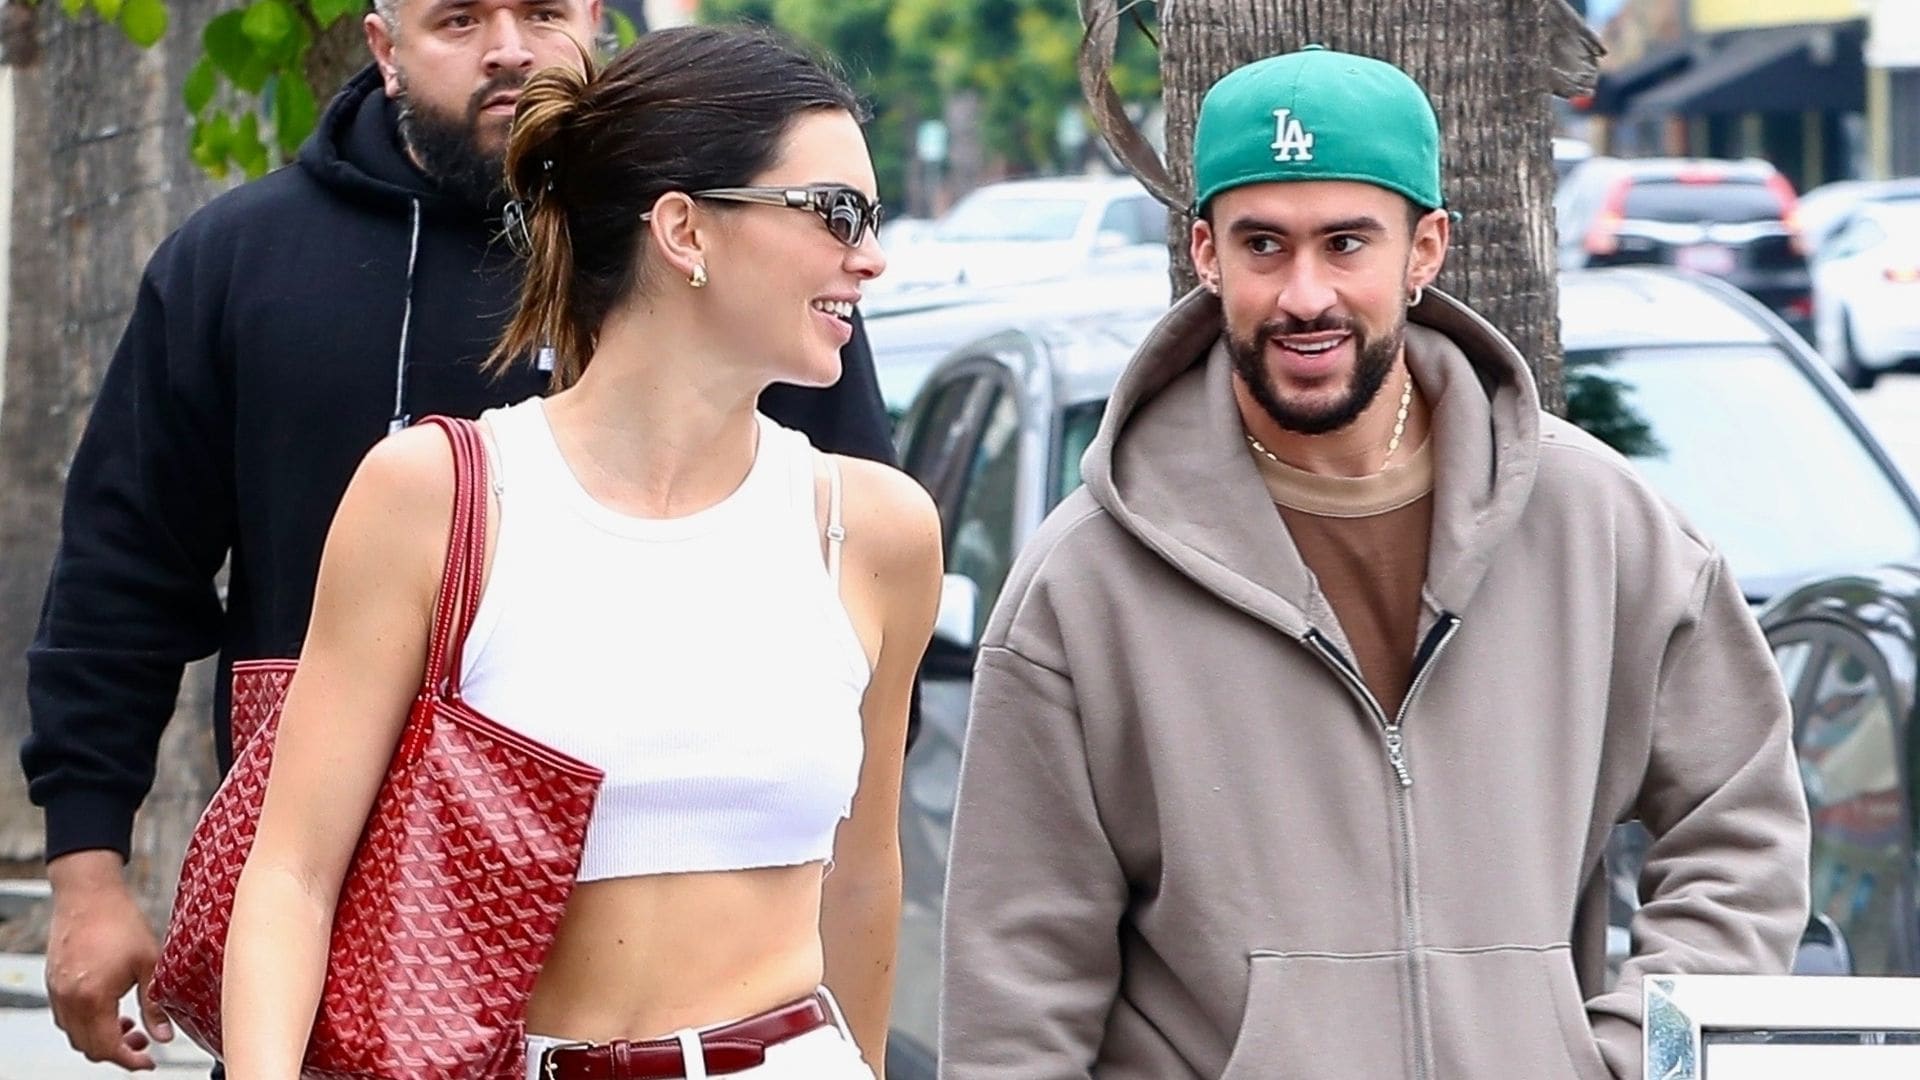 Bad Bunny and Kendall Jenner enjoy romantic Parisian night out with matching outfits